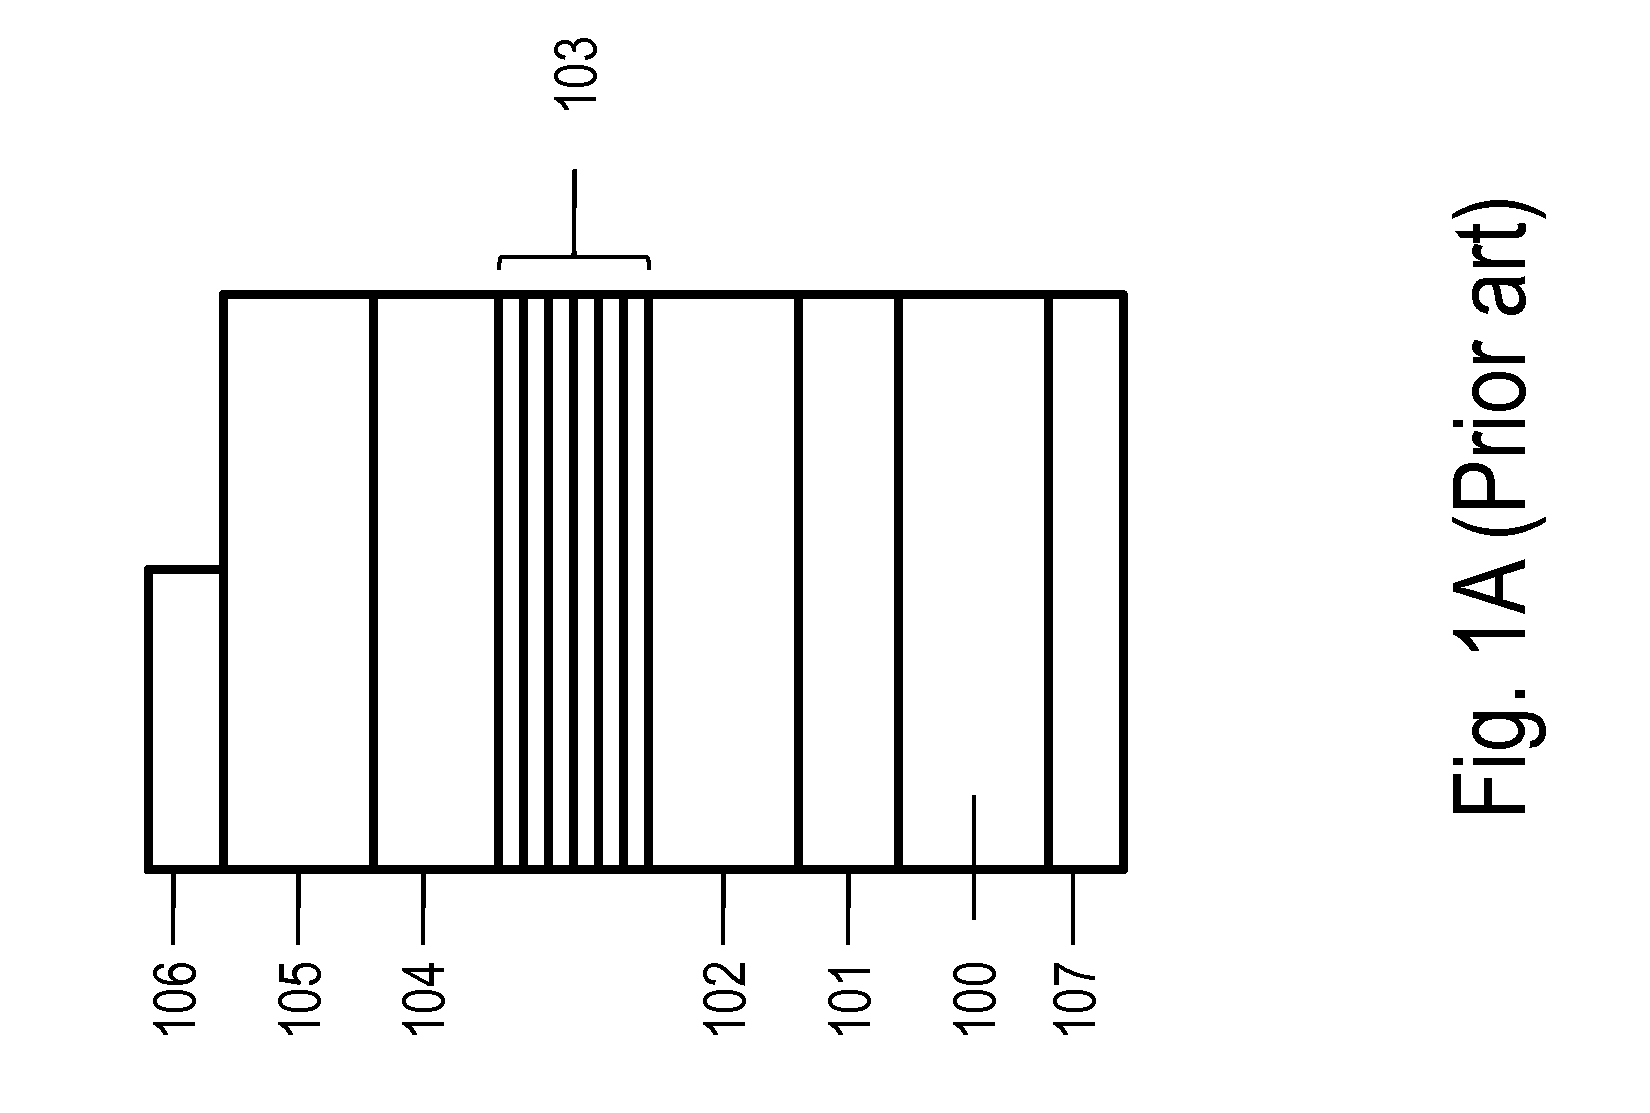 Method for fabricating novel semiconductor and optoelectronic devices